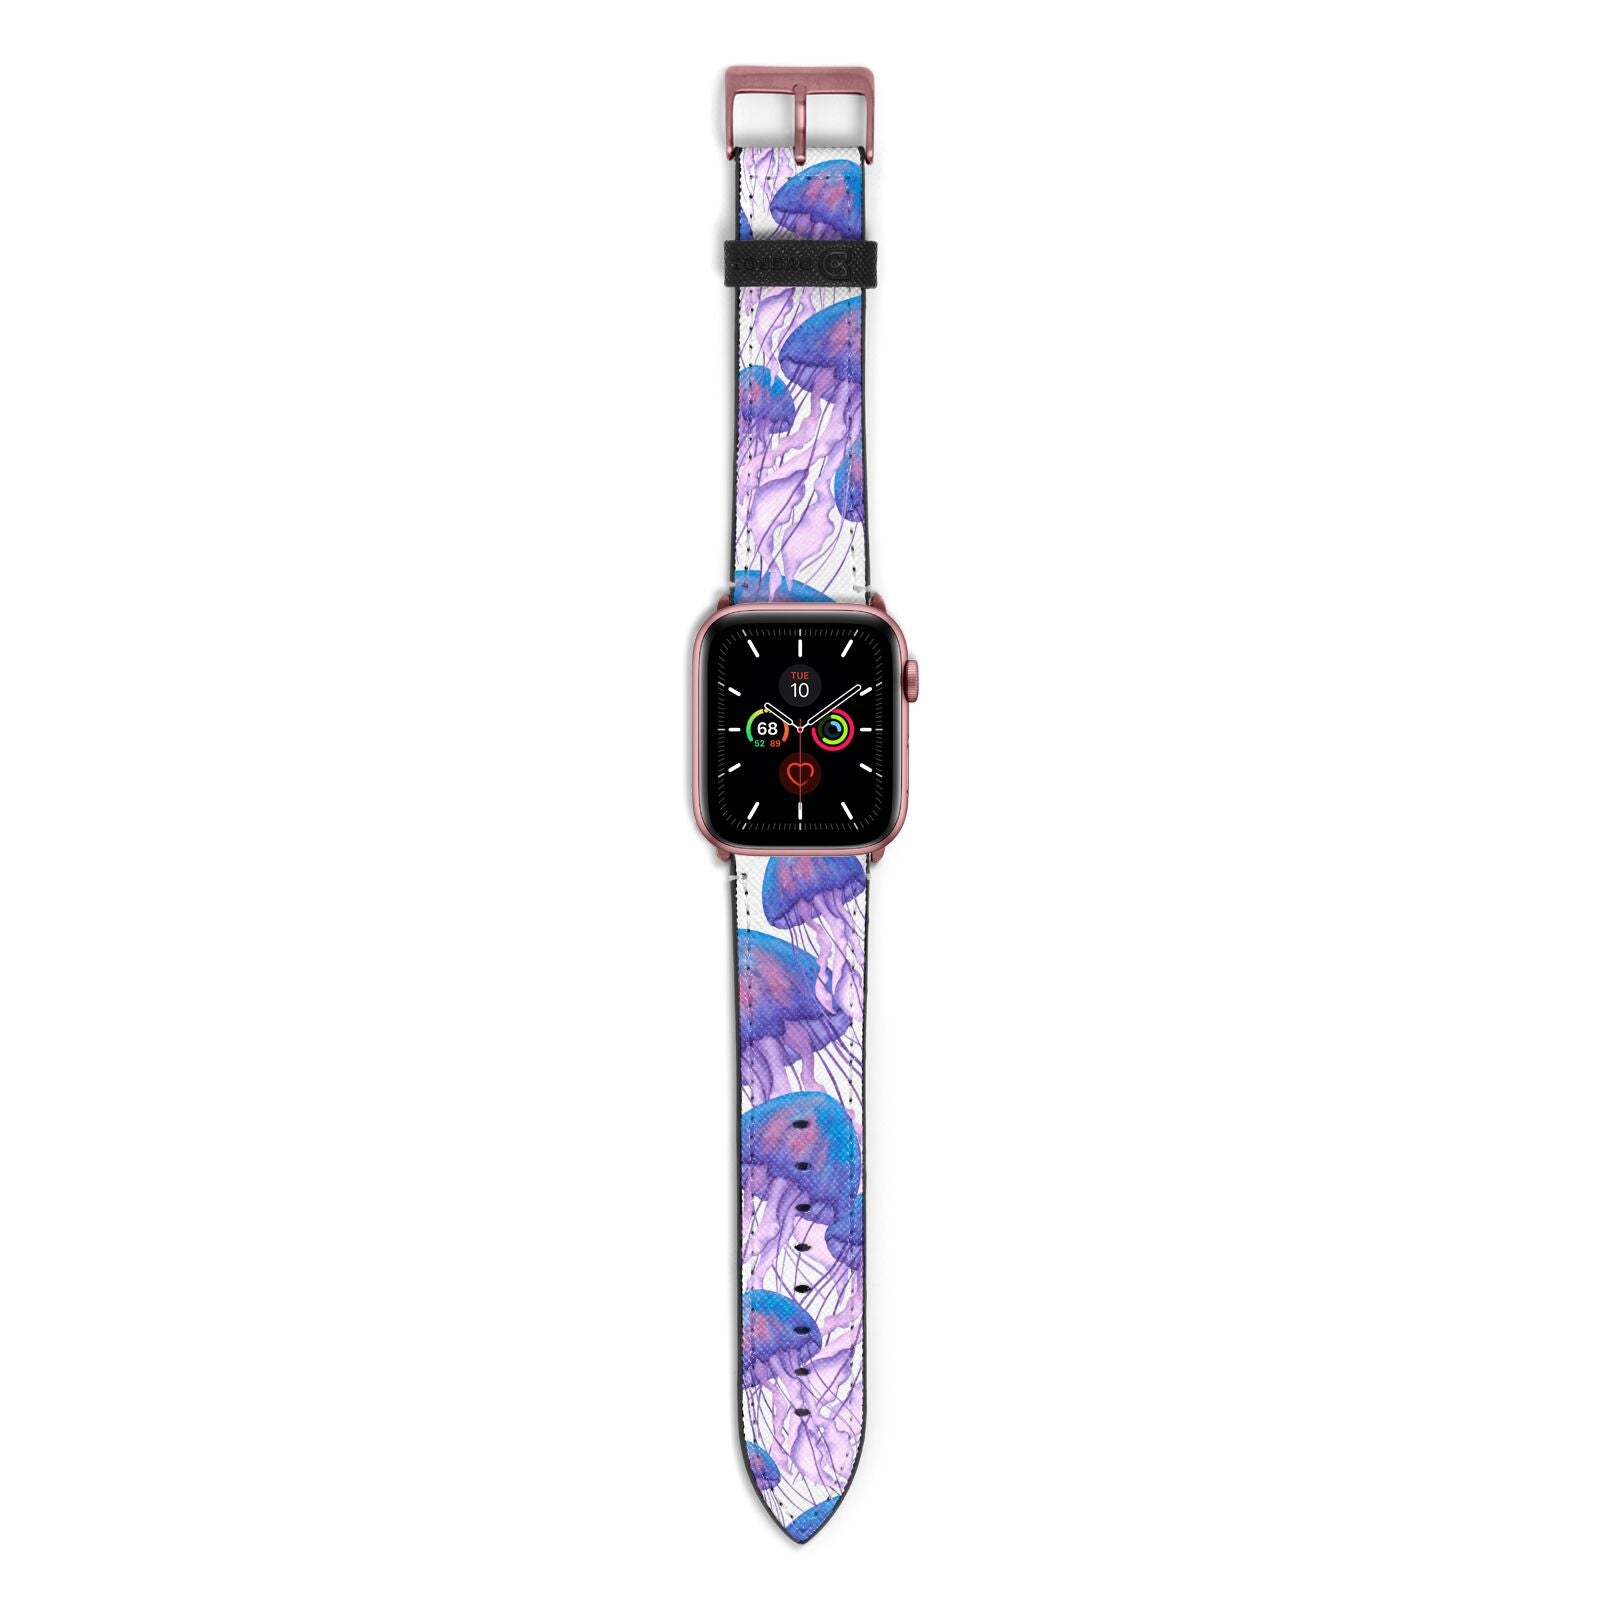 Jellyfish Apple Watch Strap with Rose Gold Hardware